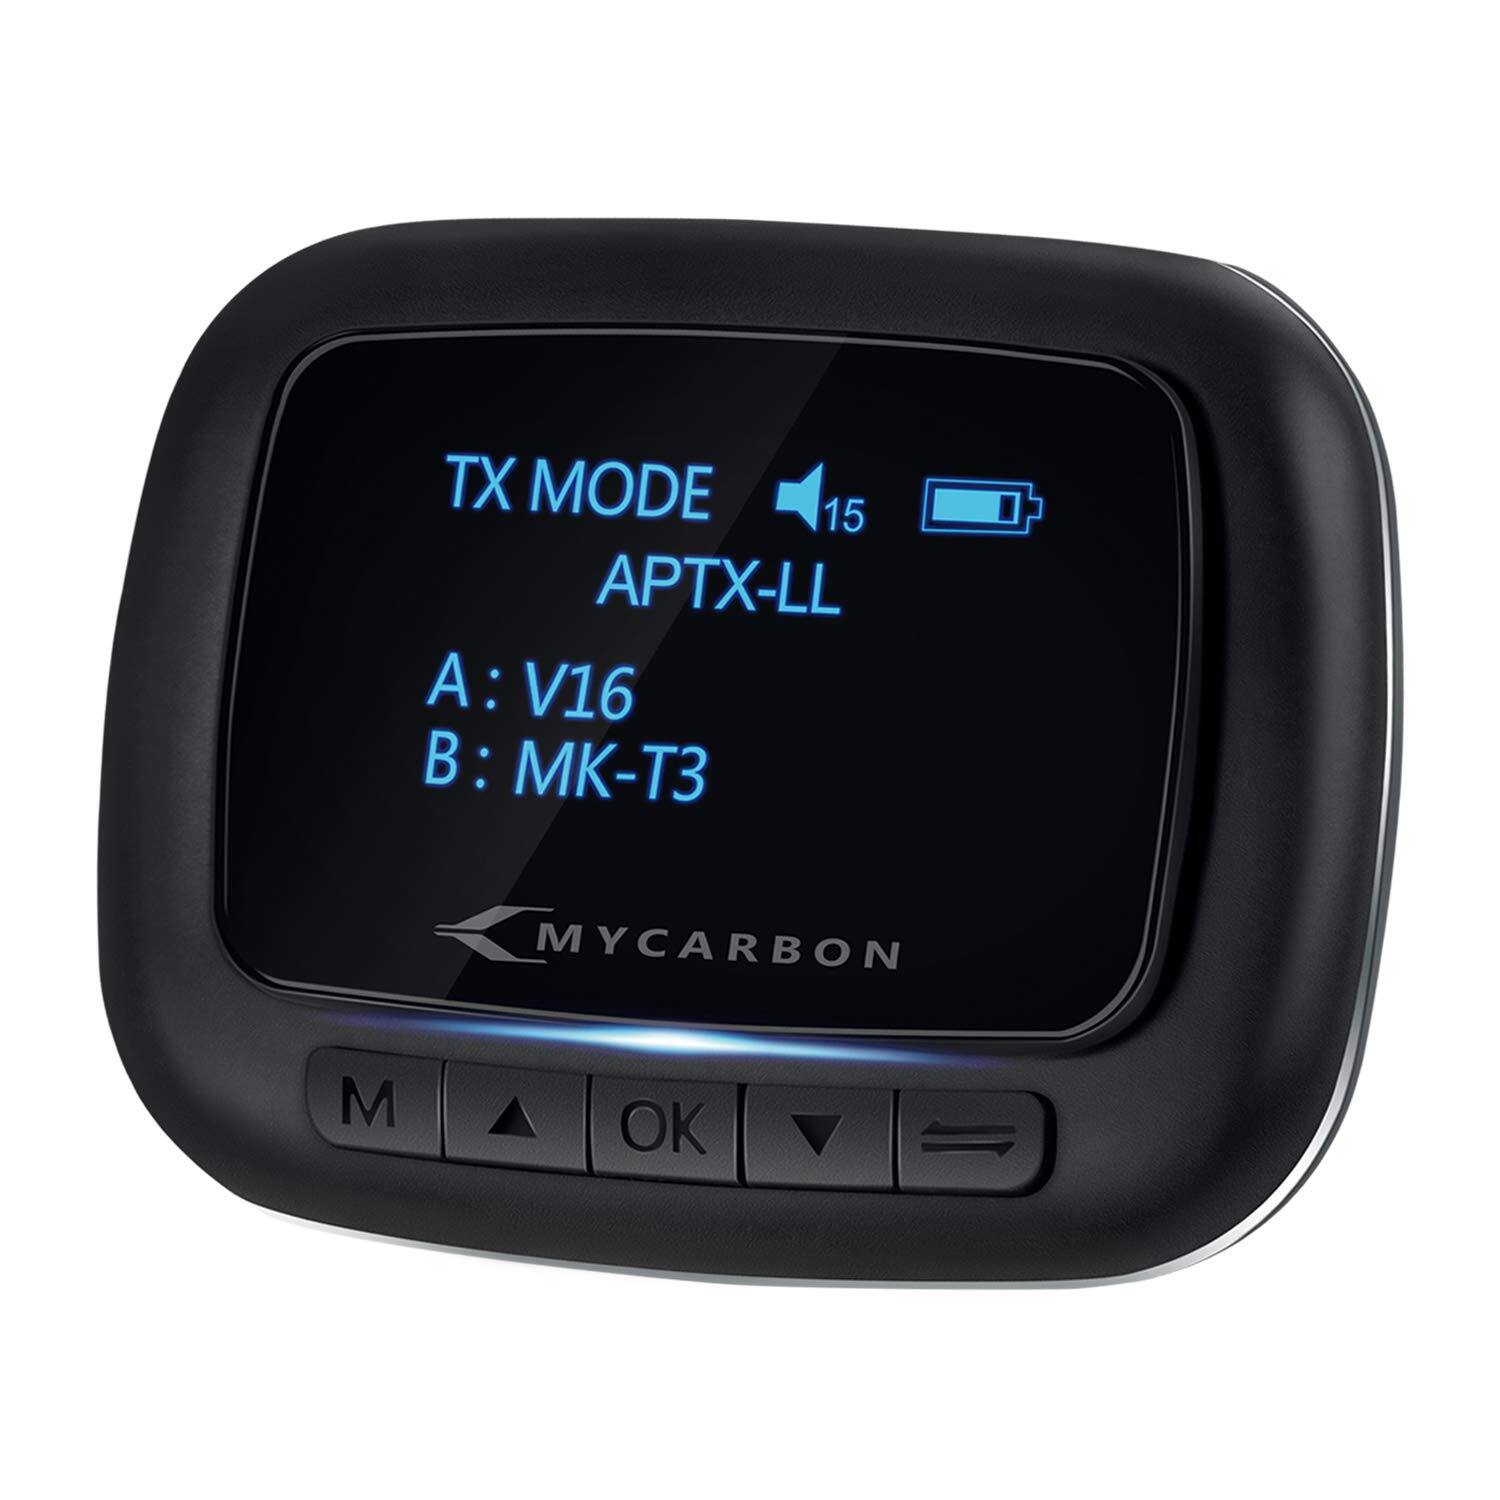 MYCARBON Wireless Bluetooth 5.1 Transmitter and Receiver only $16.49 + FS with PRIME